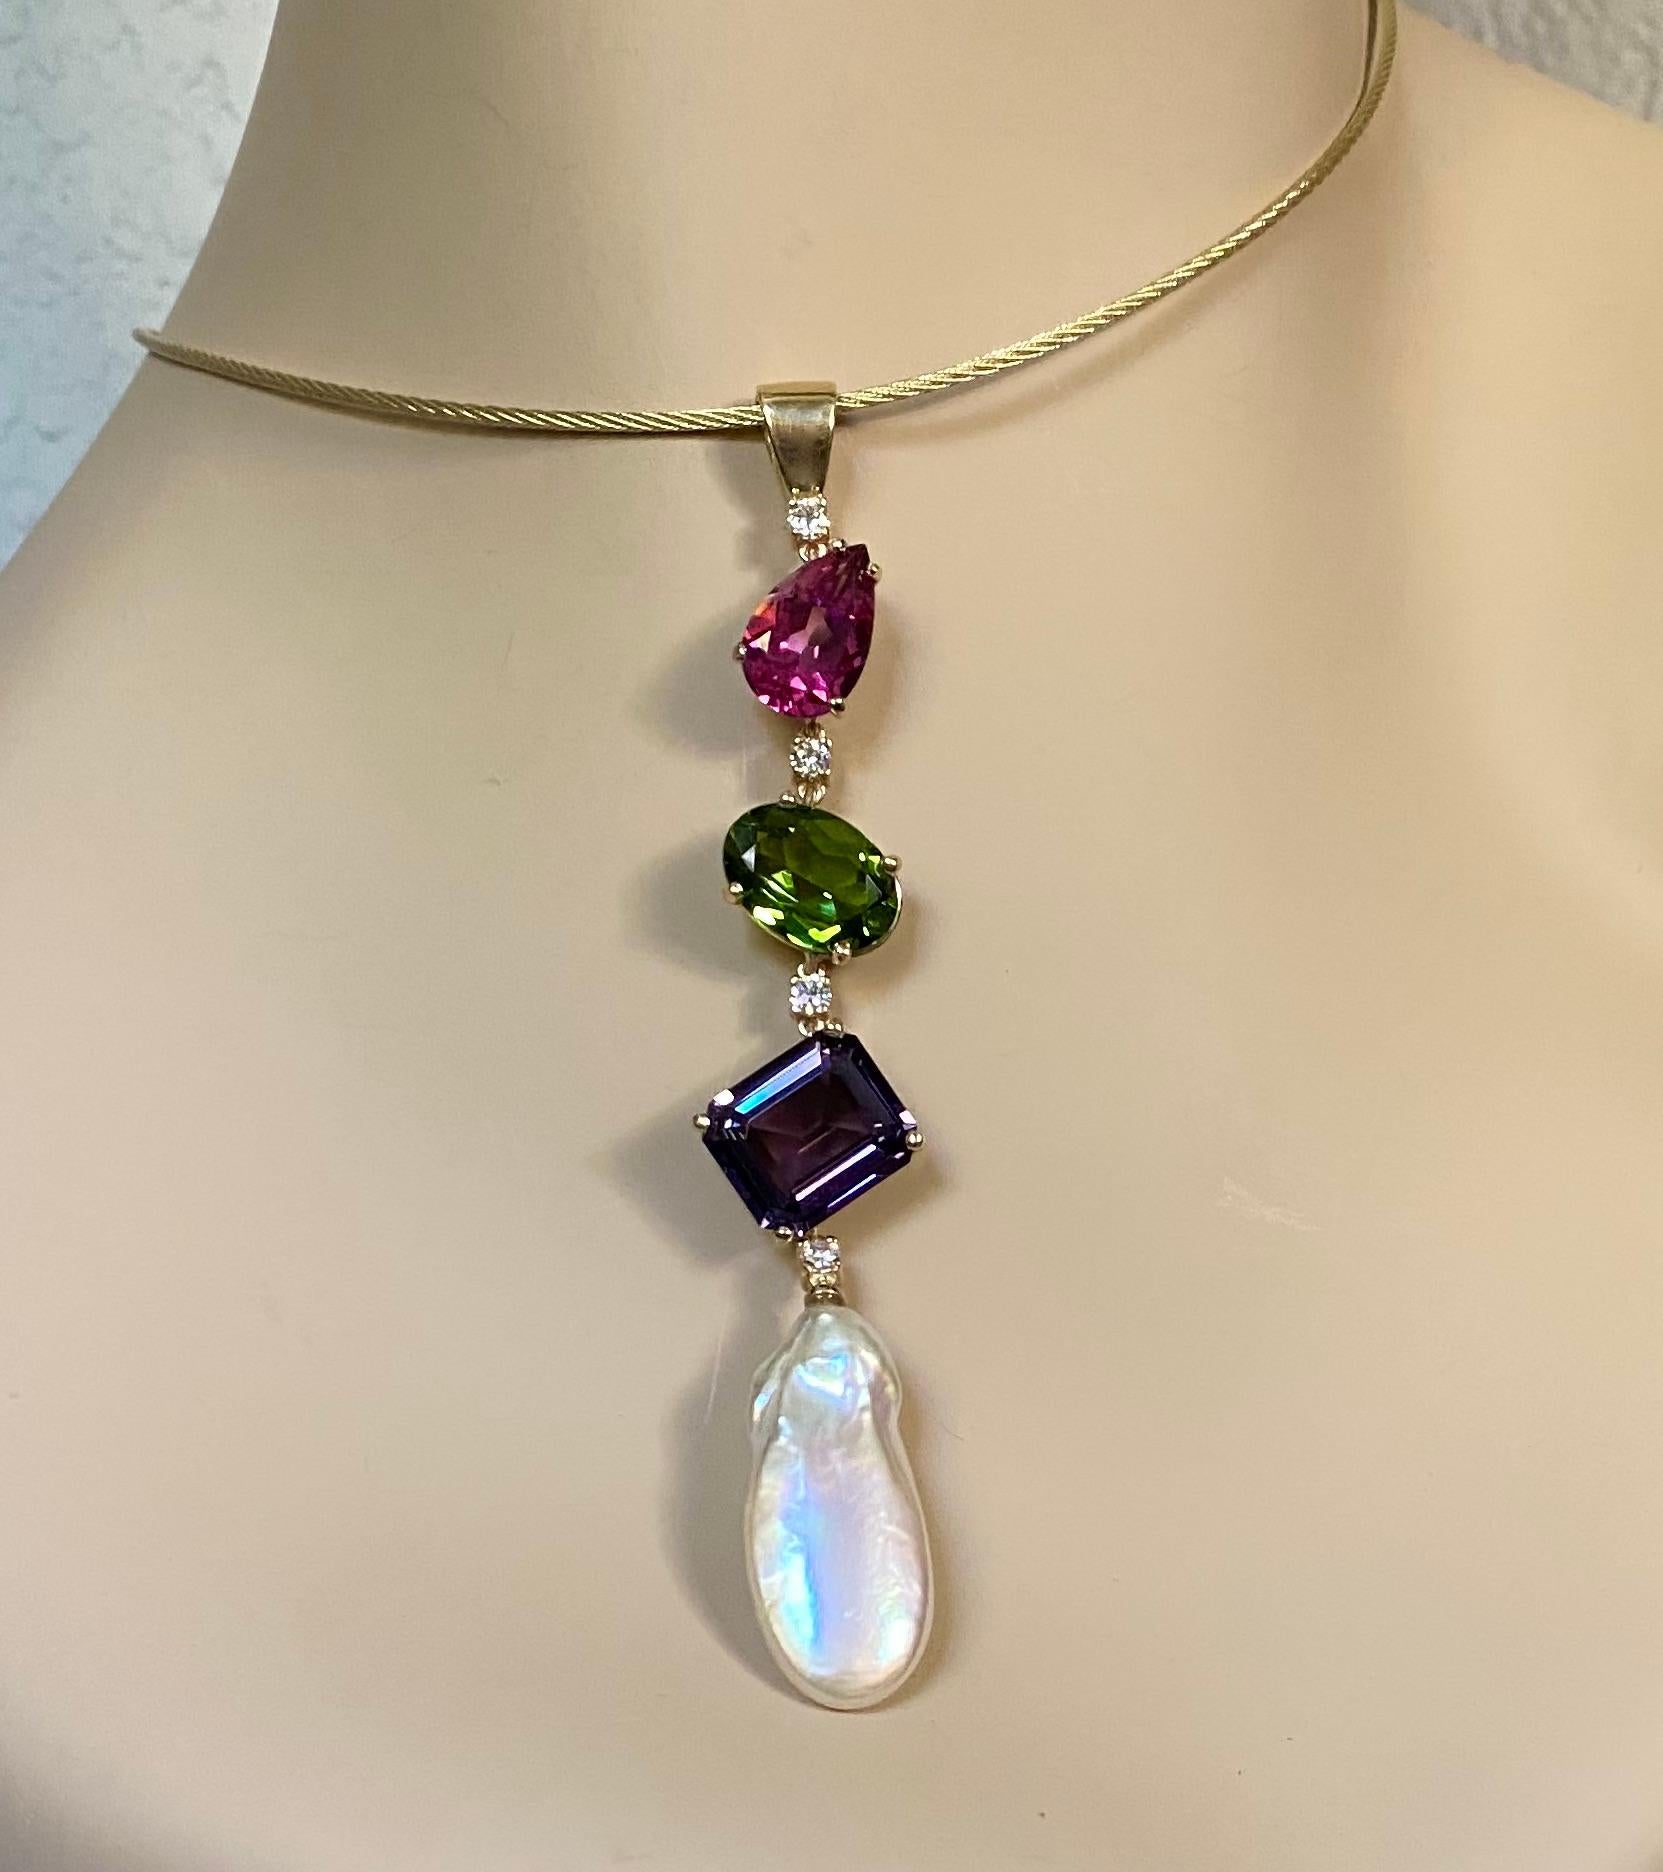 Mixed gemstones along with a baroque pearl and diamonds are offered in this Stiletto pendant.  A brightly colored pear shaped pink topaz and a brilliantly colored oval peridot along with a richly colored emerald cut amethyst are spaced with